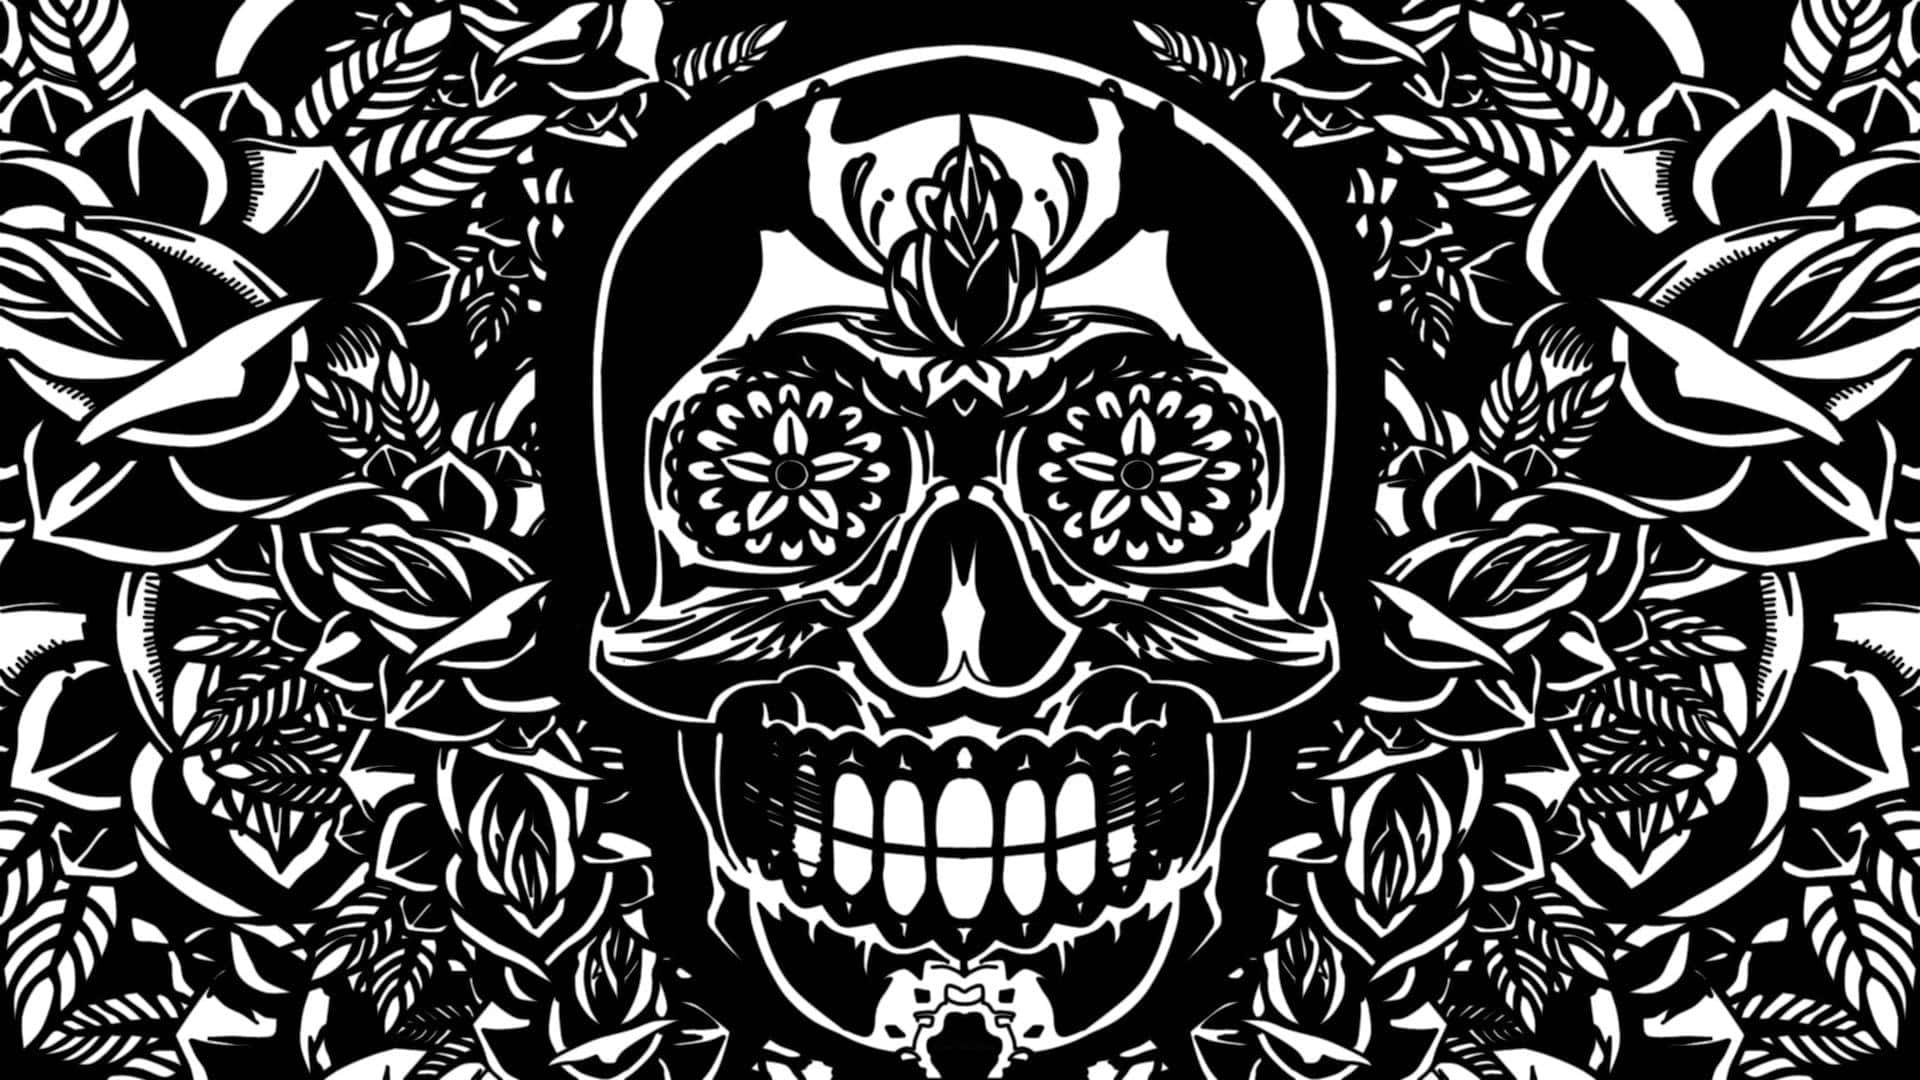 A Black And White Skull With Flowers And Leaves